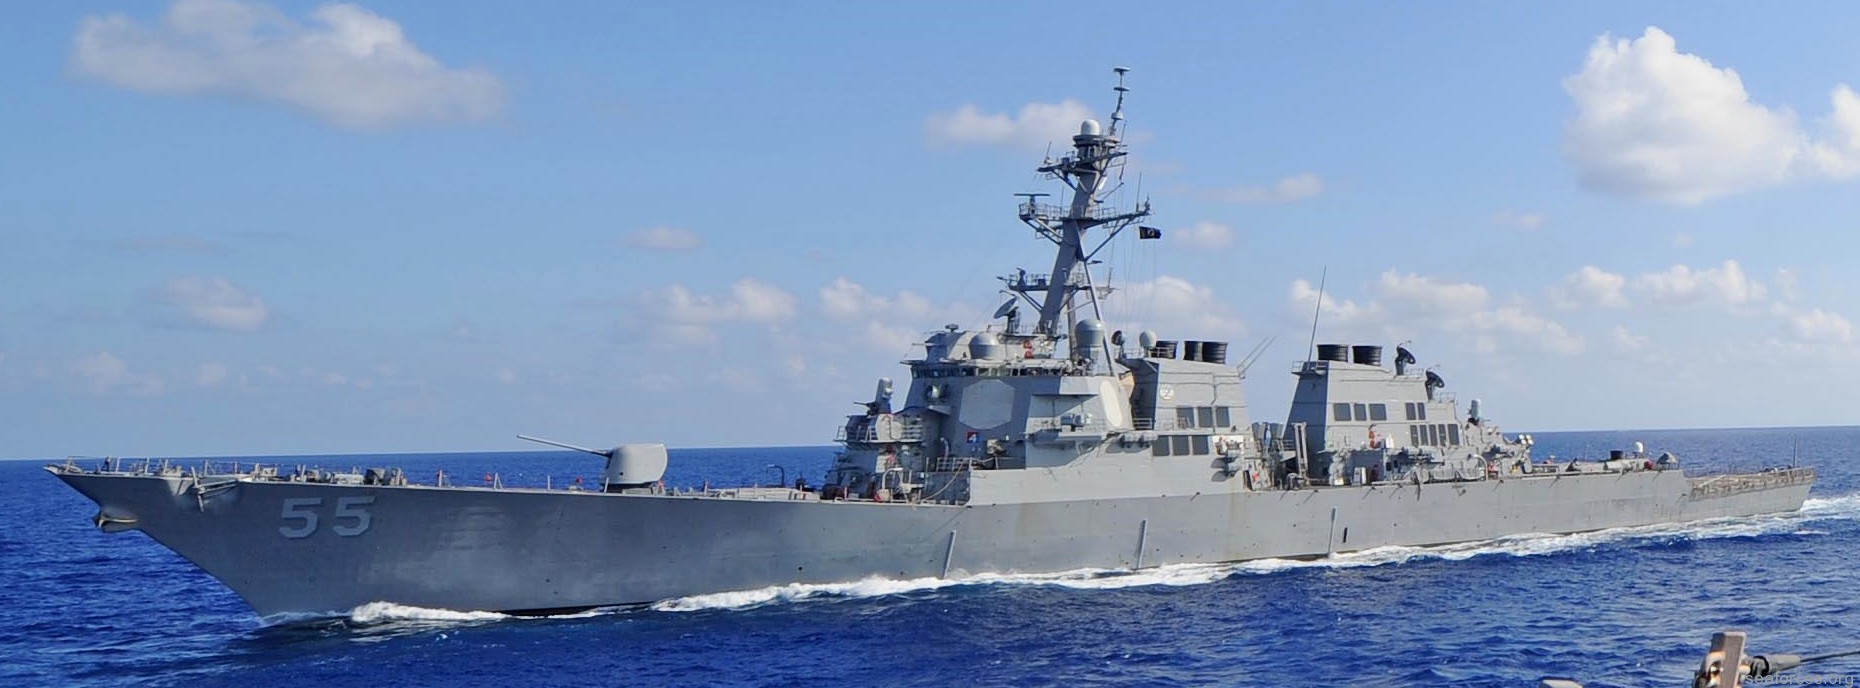 ddg-55 uss stout guided missile destroyer us navy 69